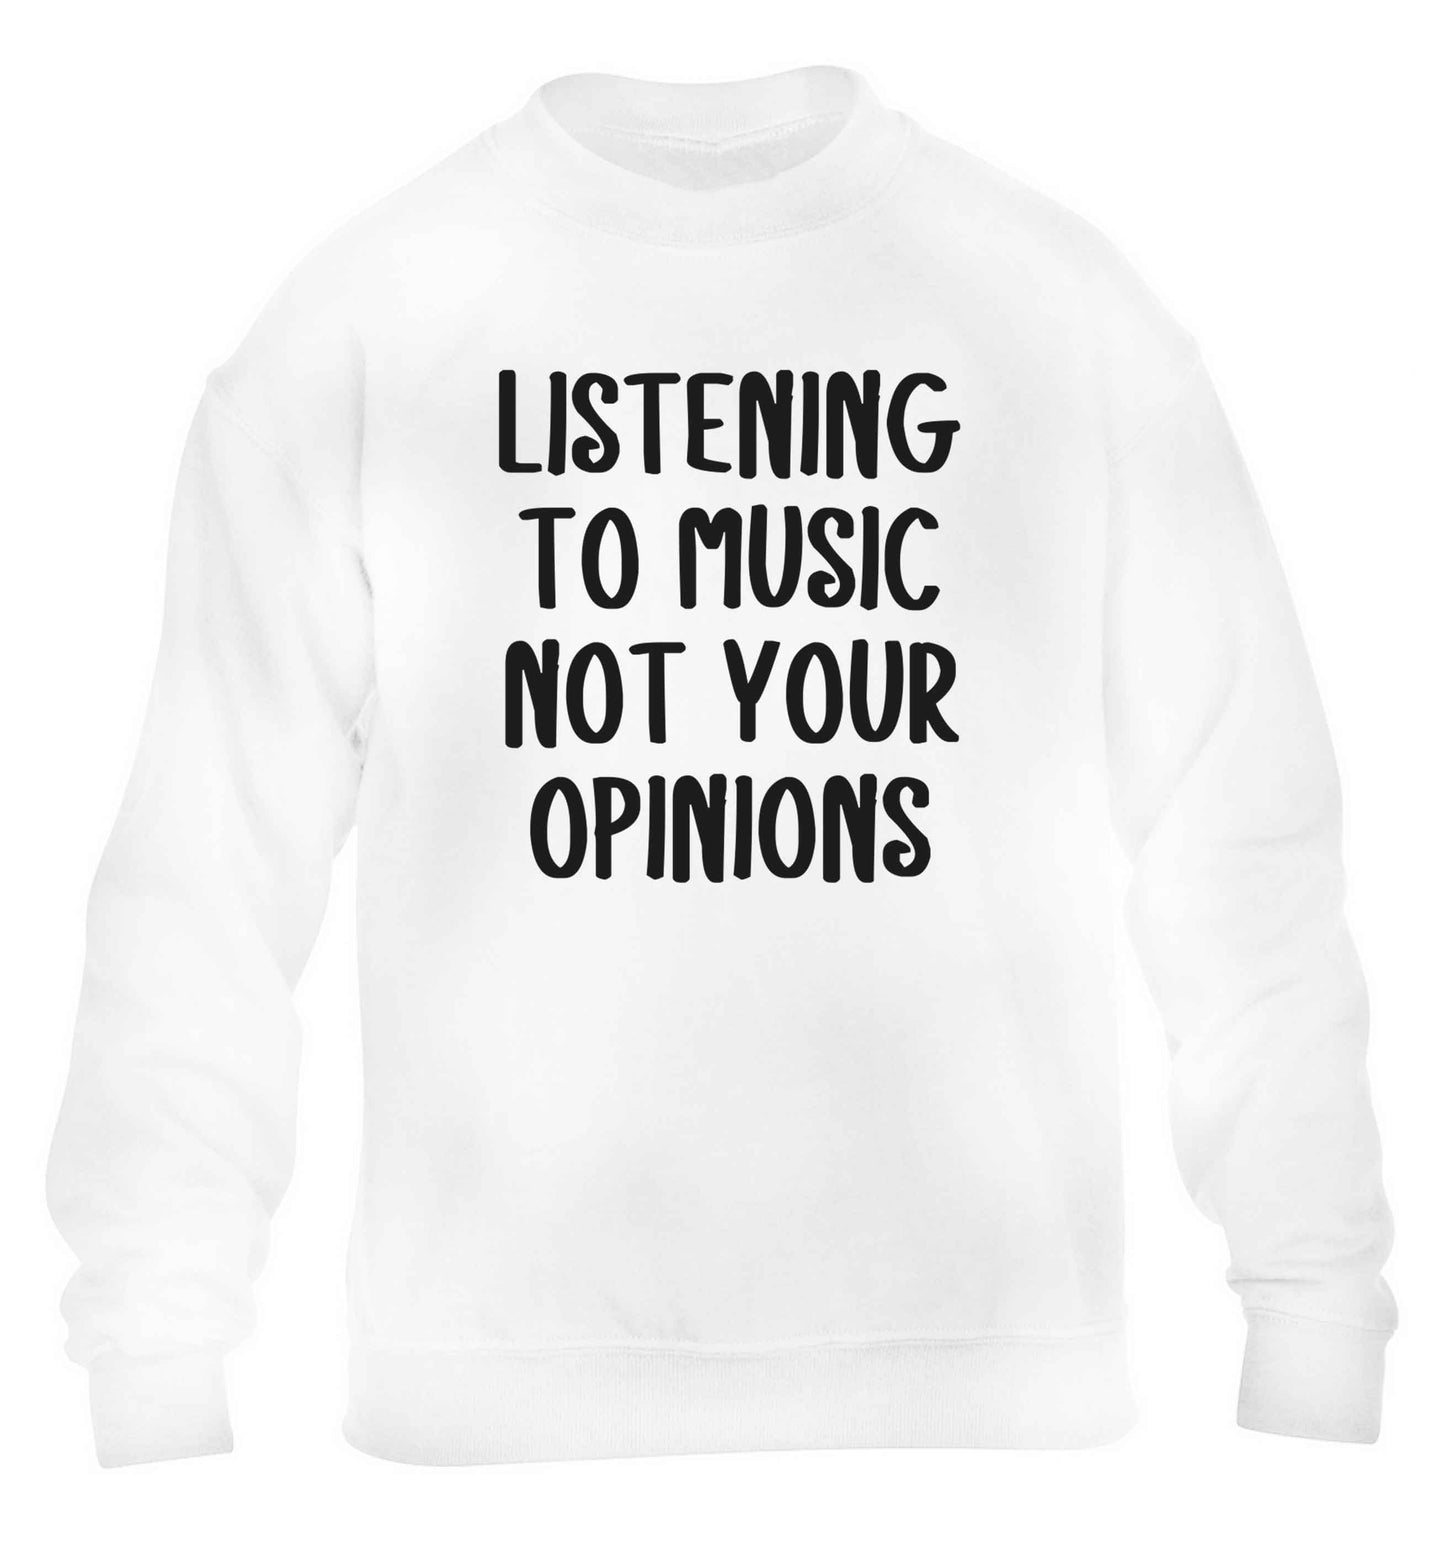 Listening to music not your opinions children's white sweater 12-13 Years